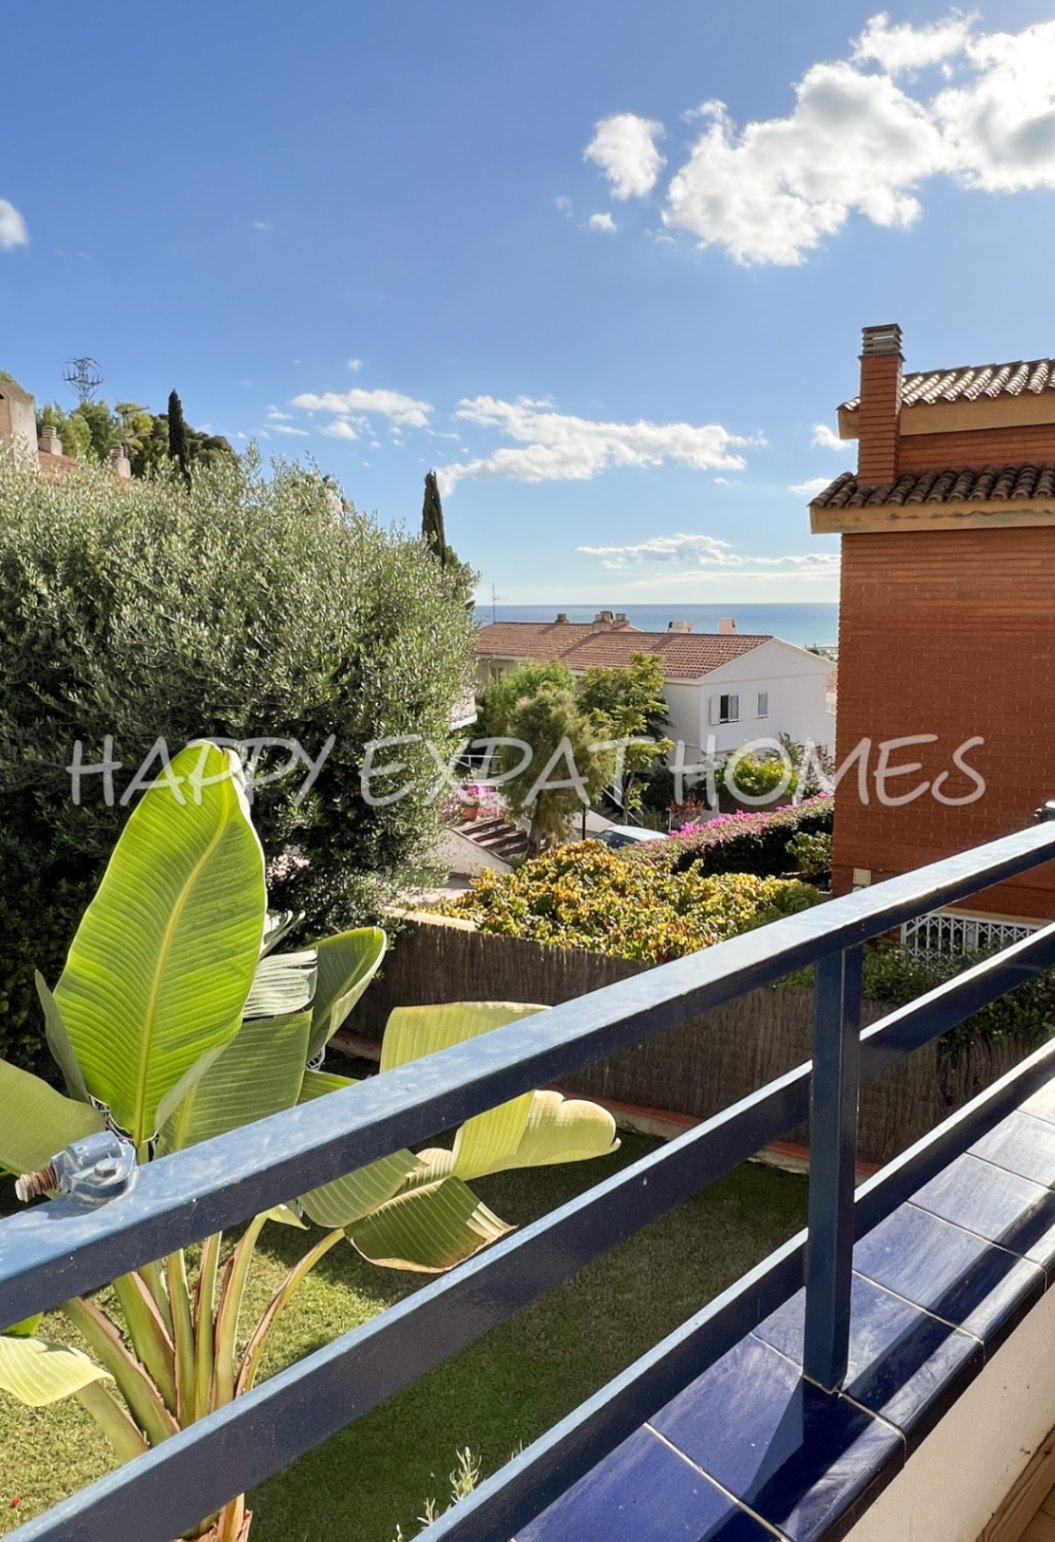 3-bedrooms flat with seaview close to Sitges Port